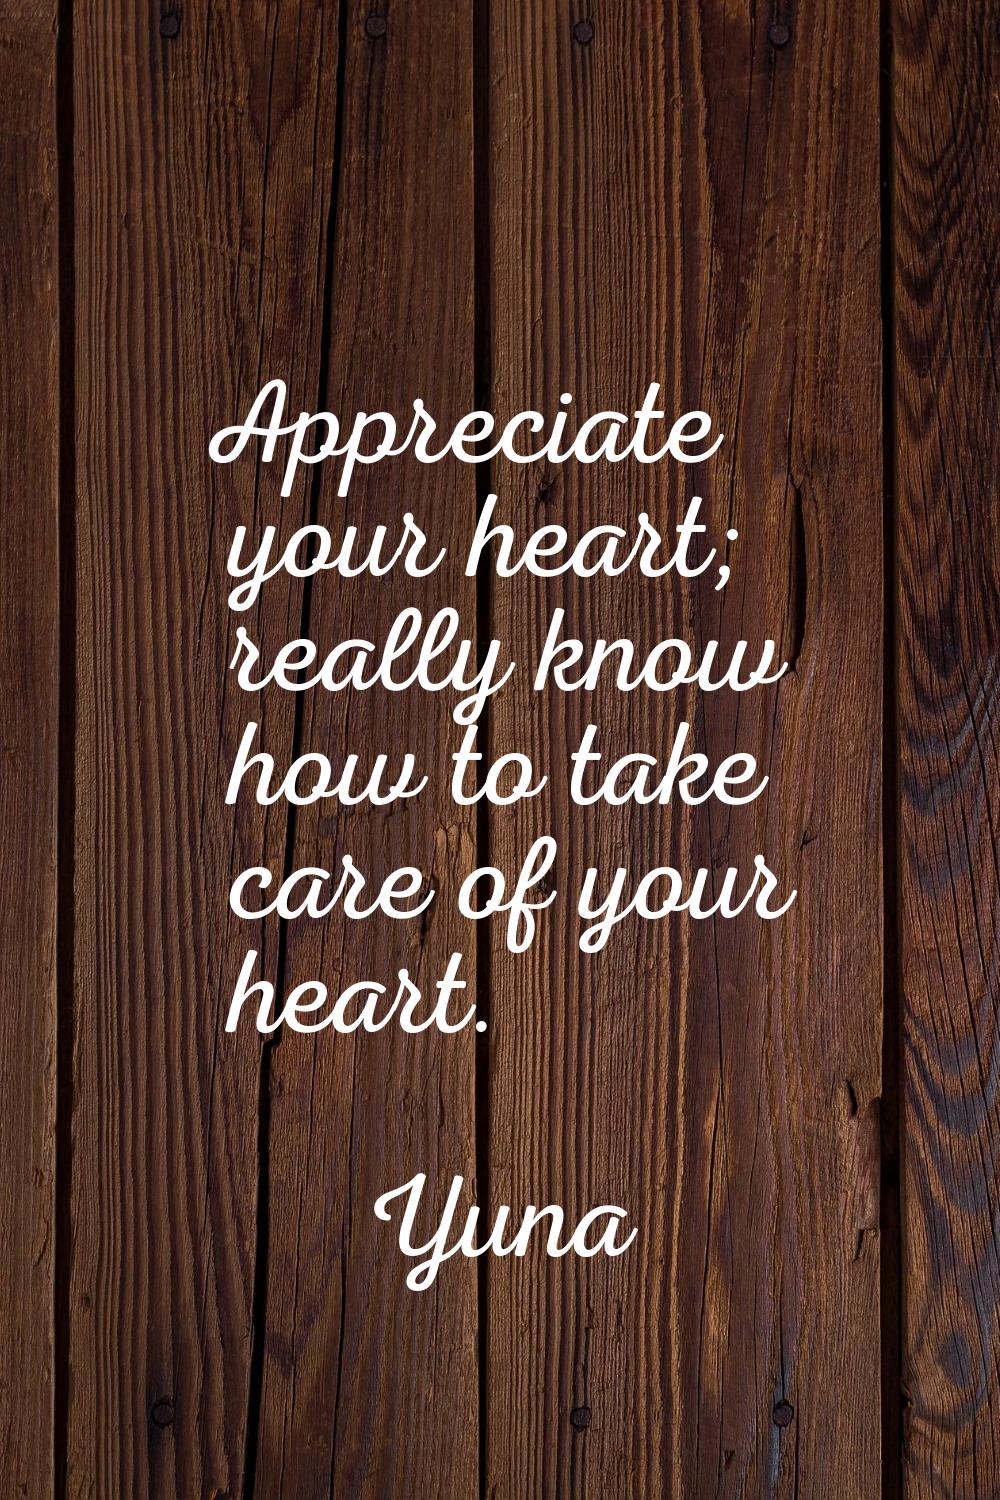 Appreciate your heart; really know how to take care of your heart.